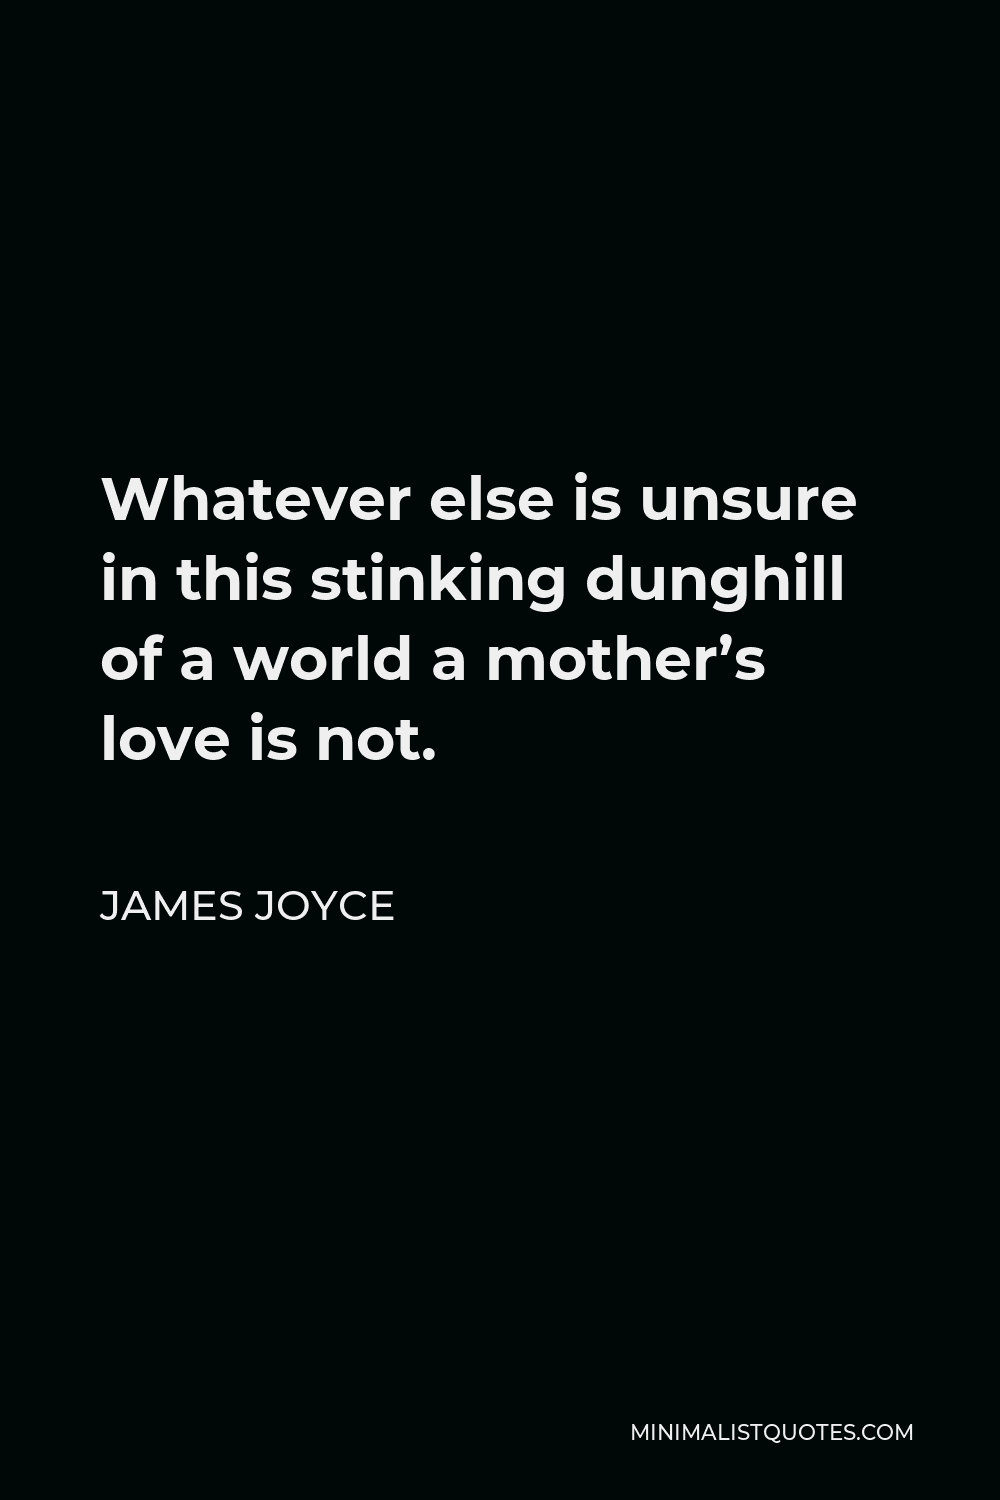 James Joyce Quote - Whatever else is unsure in this stinking dunghill of a world a mother’s love is not.